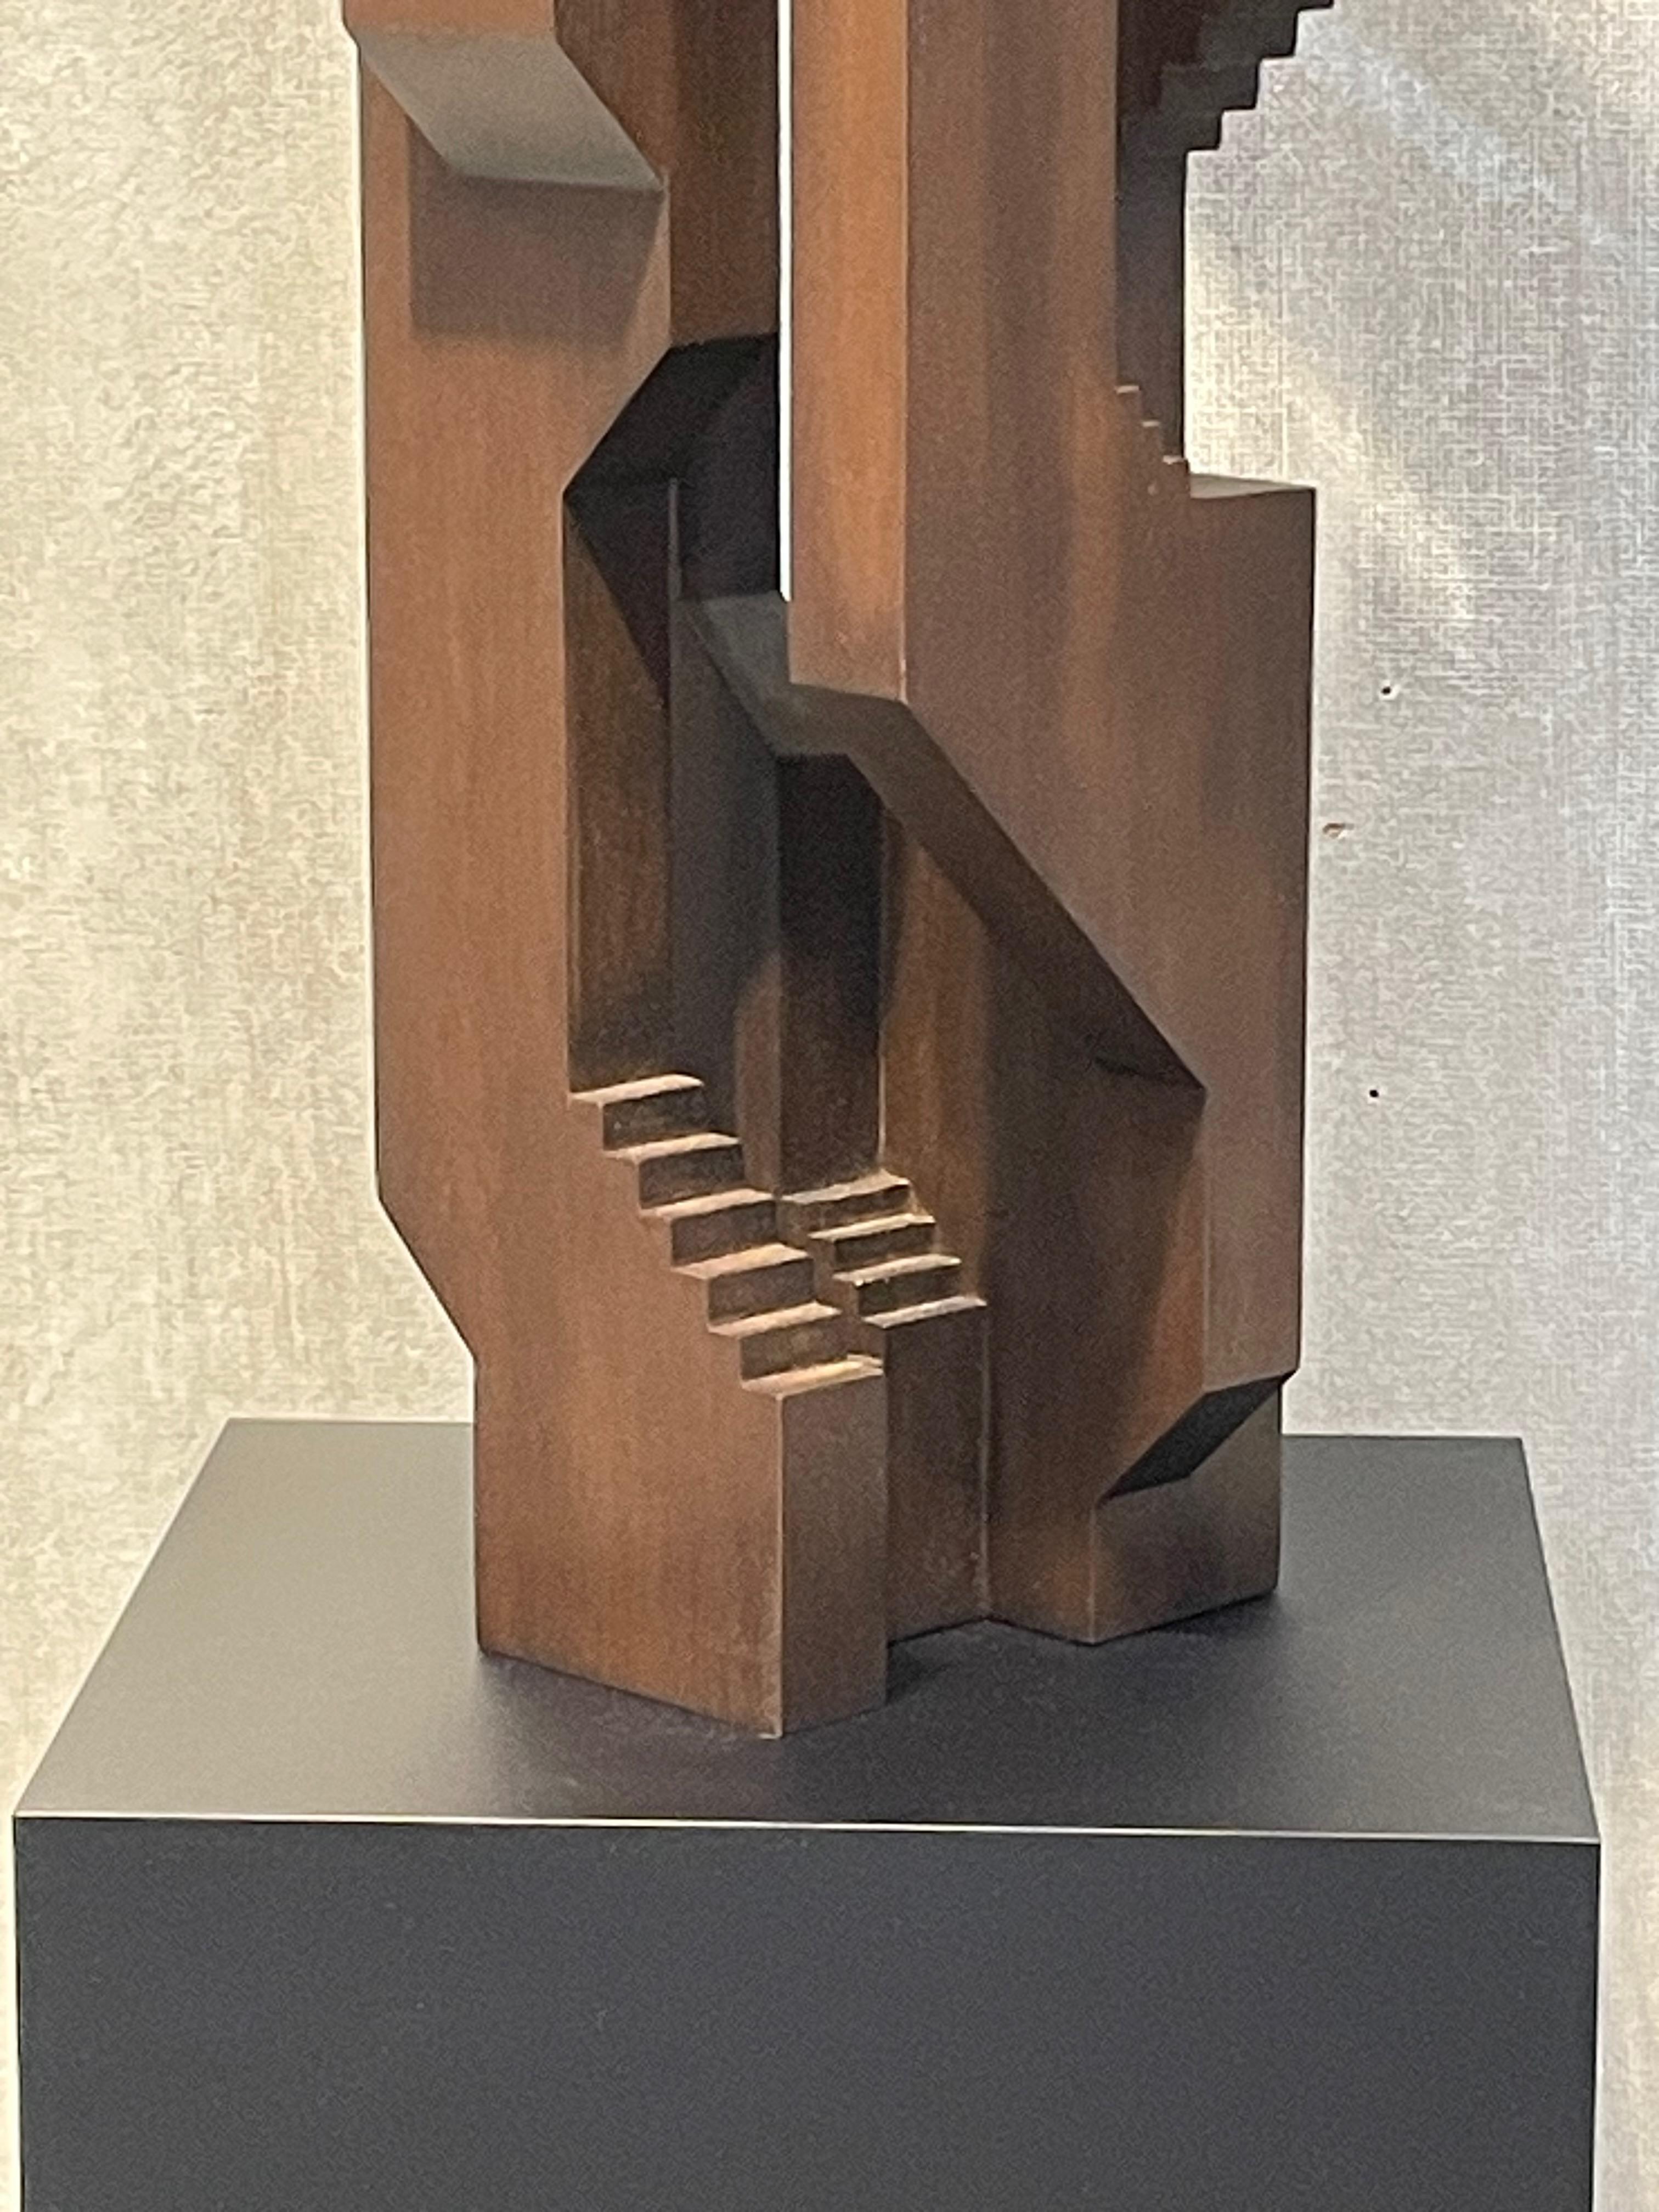 Espresso Brown Wooden Abstract Sculpture By David Umemoto, Canada, Contemporary  In New Condition For Sale In New York, NY